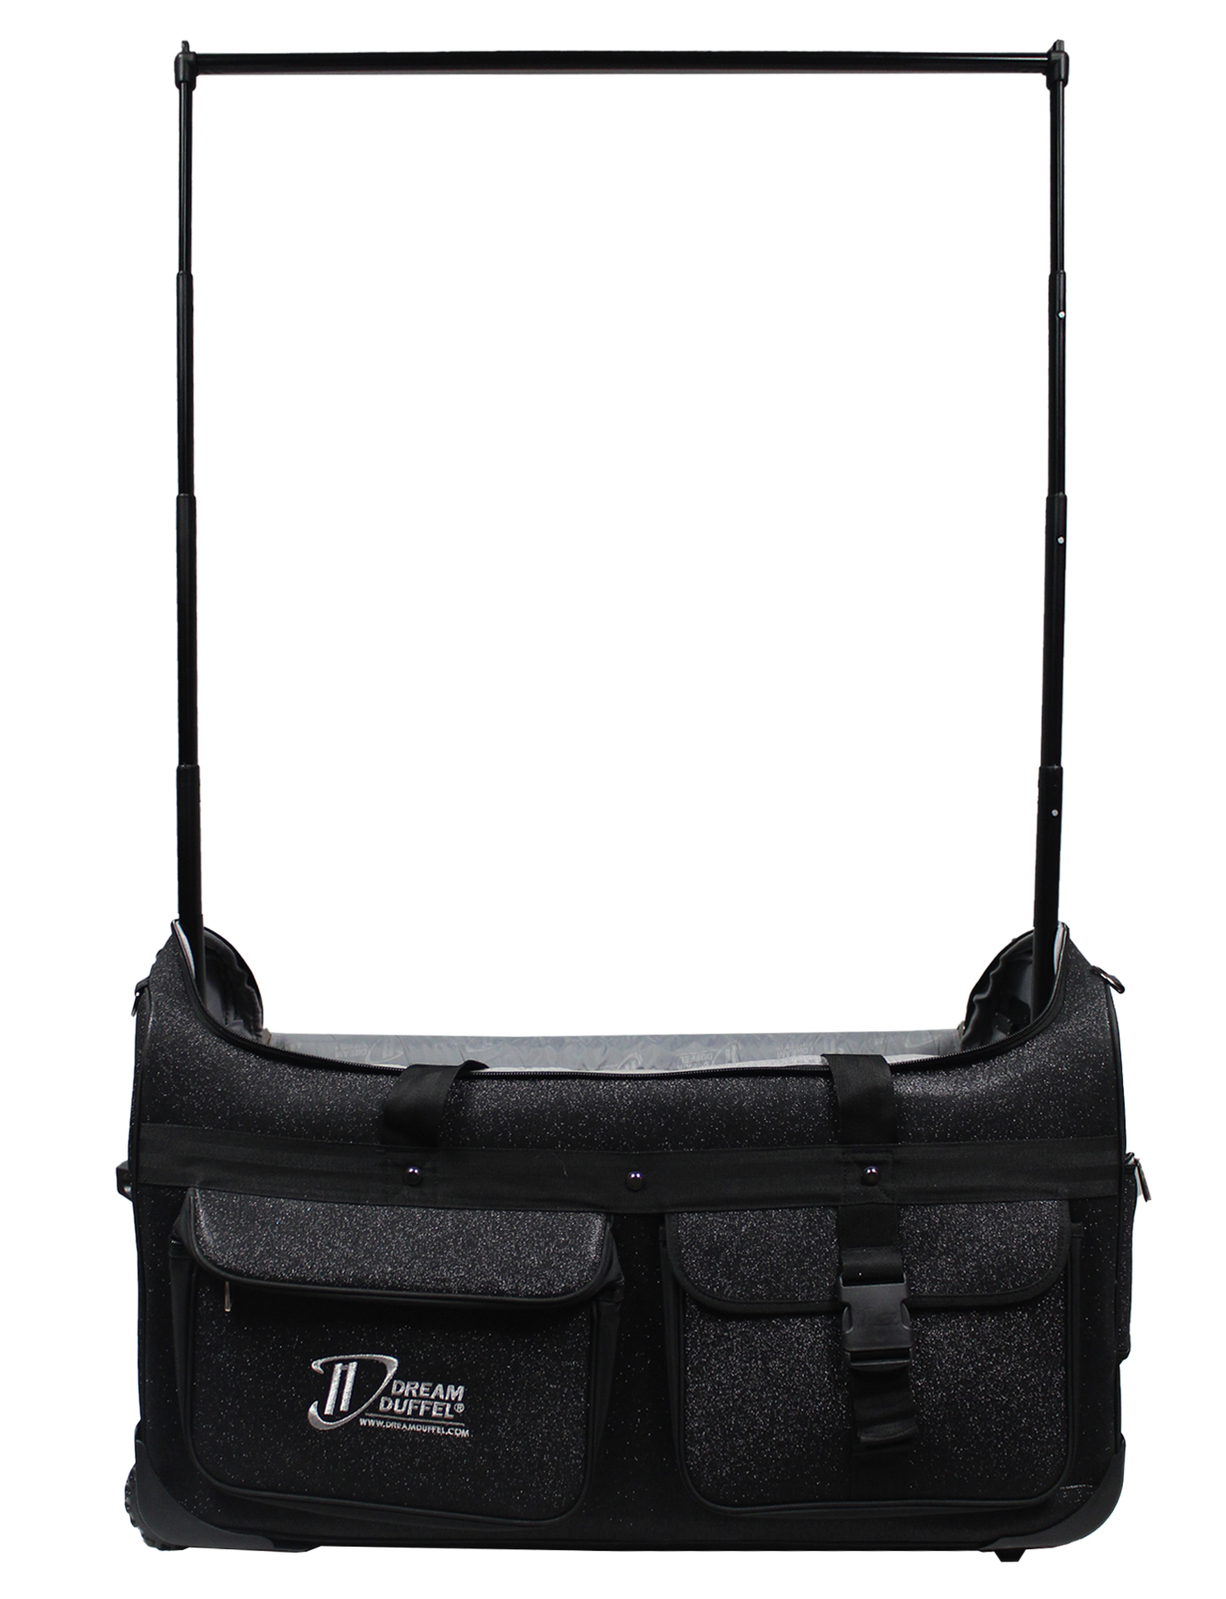 Dream Duffel Small Sparkles Package; Black